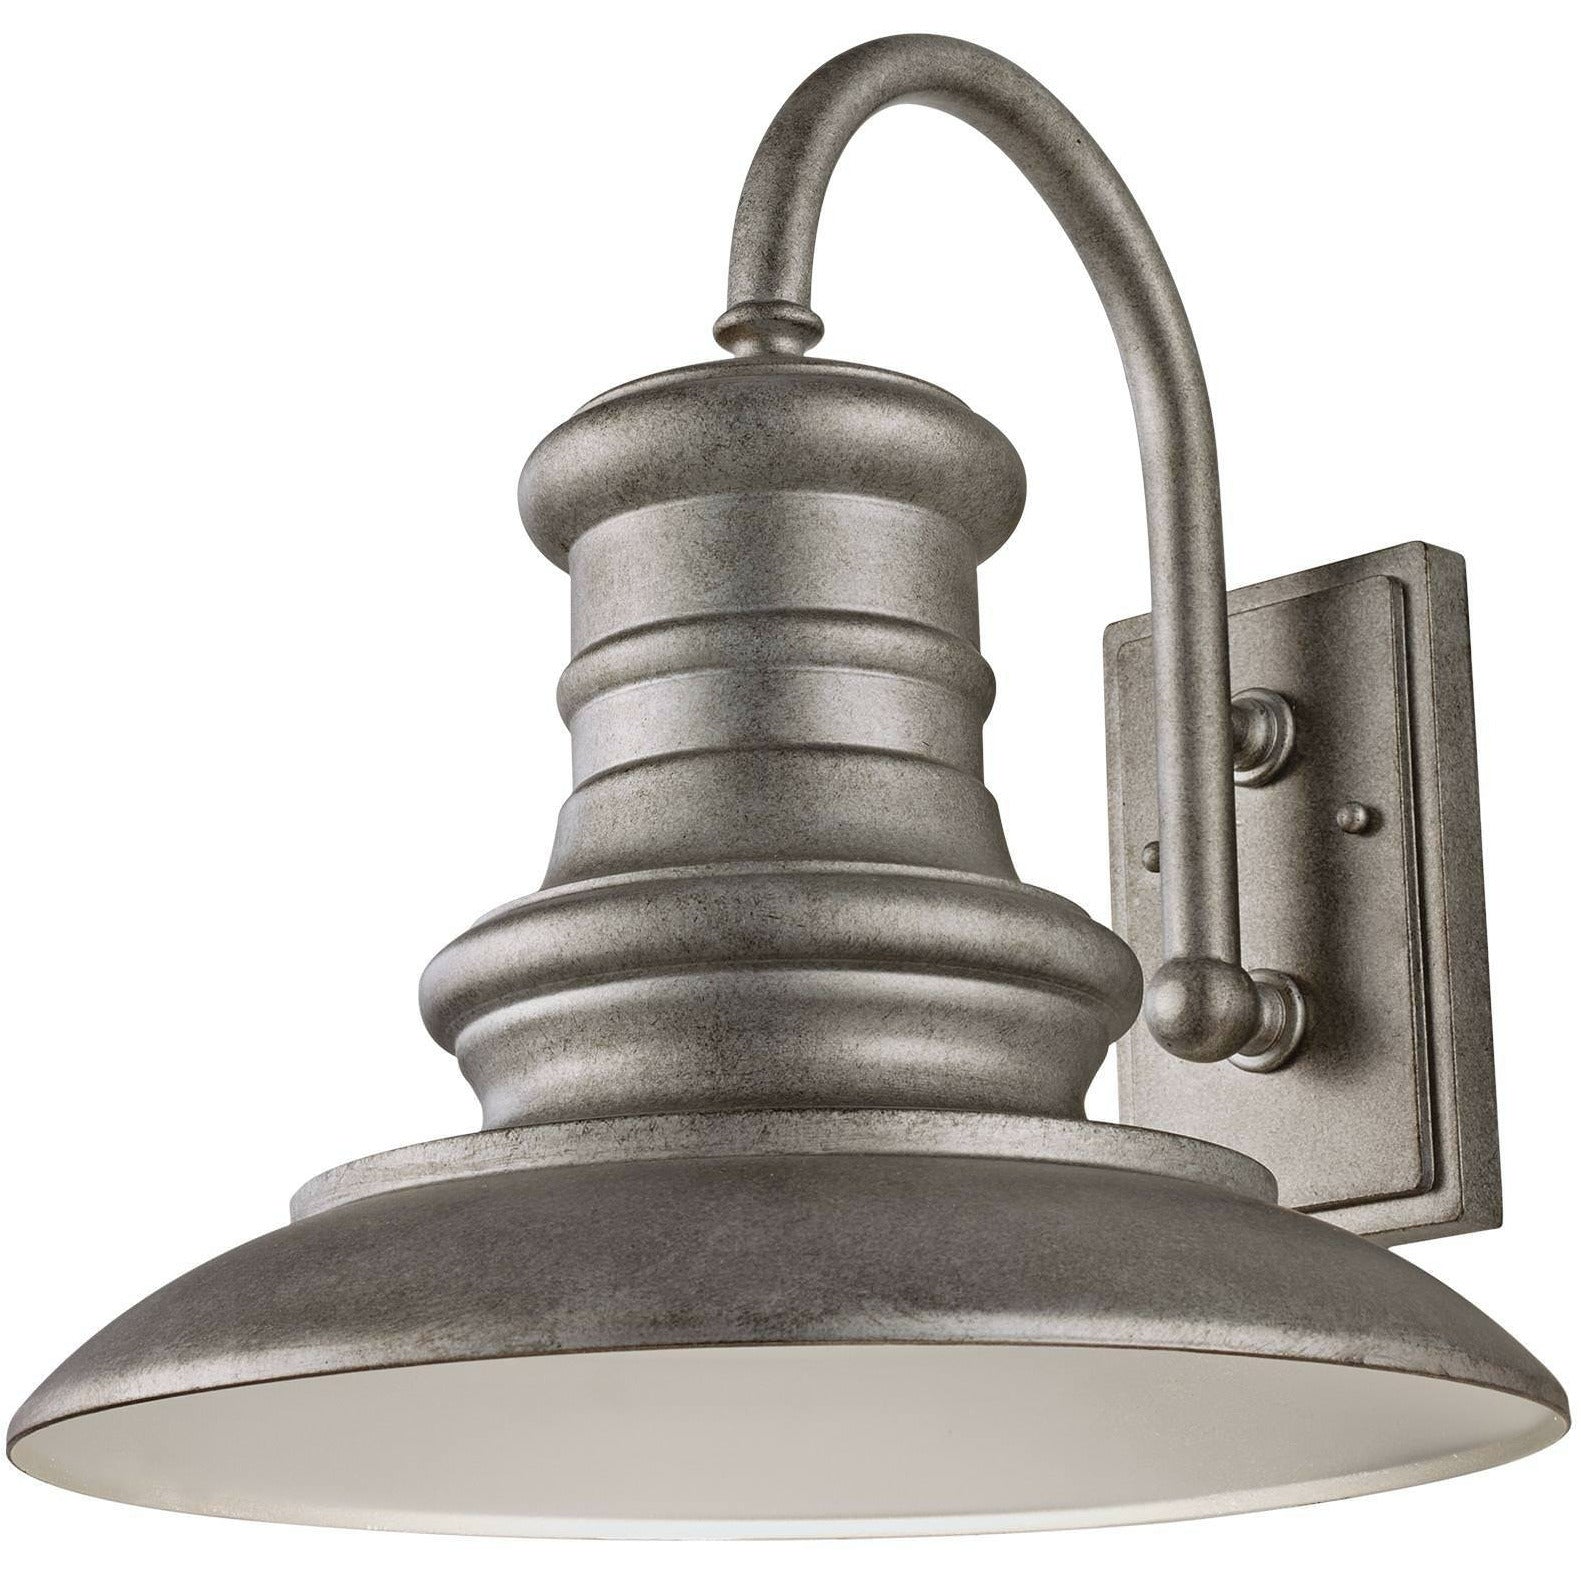 Redding Station Outdoor Wall Light Tarnished Silver